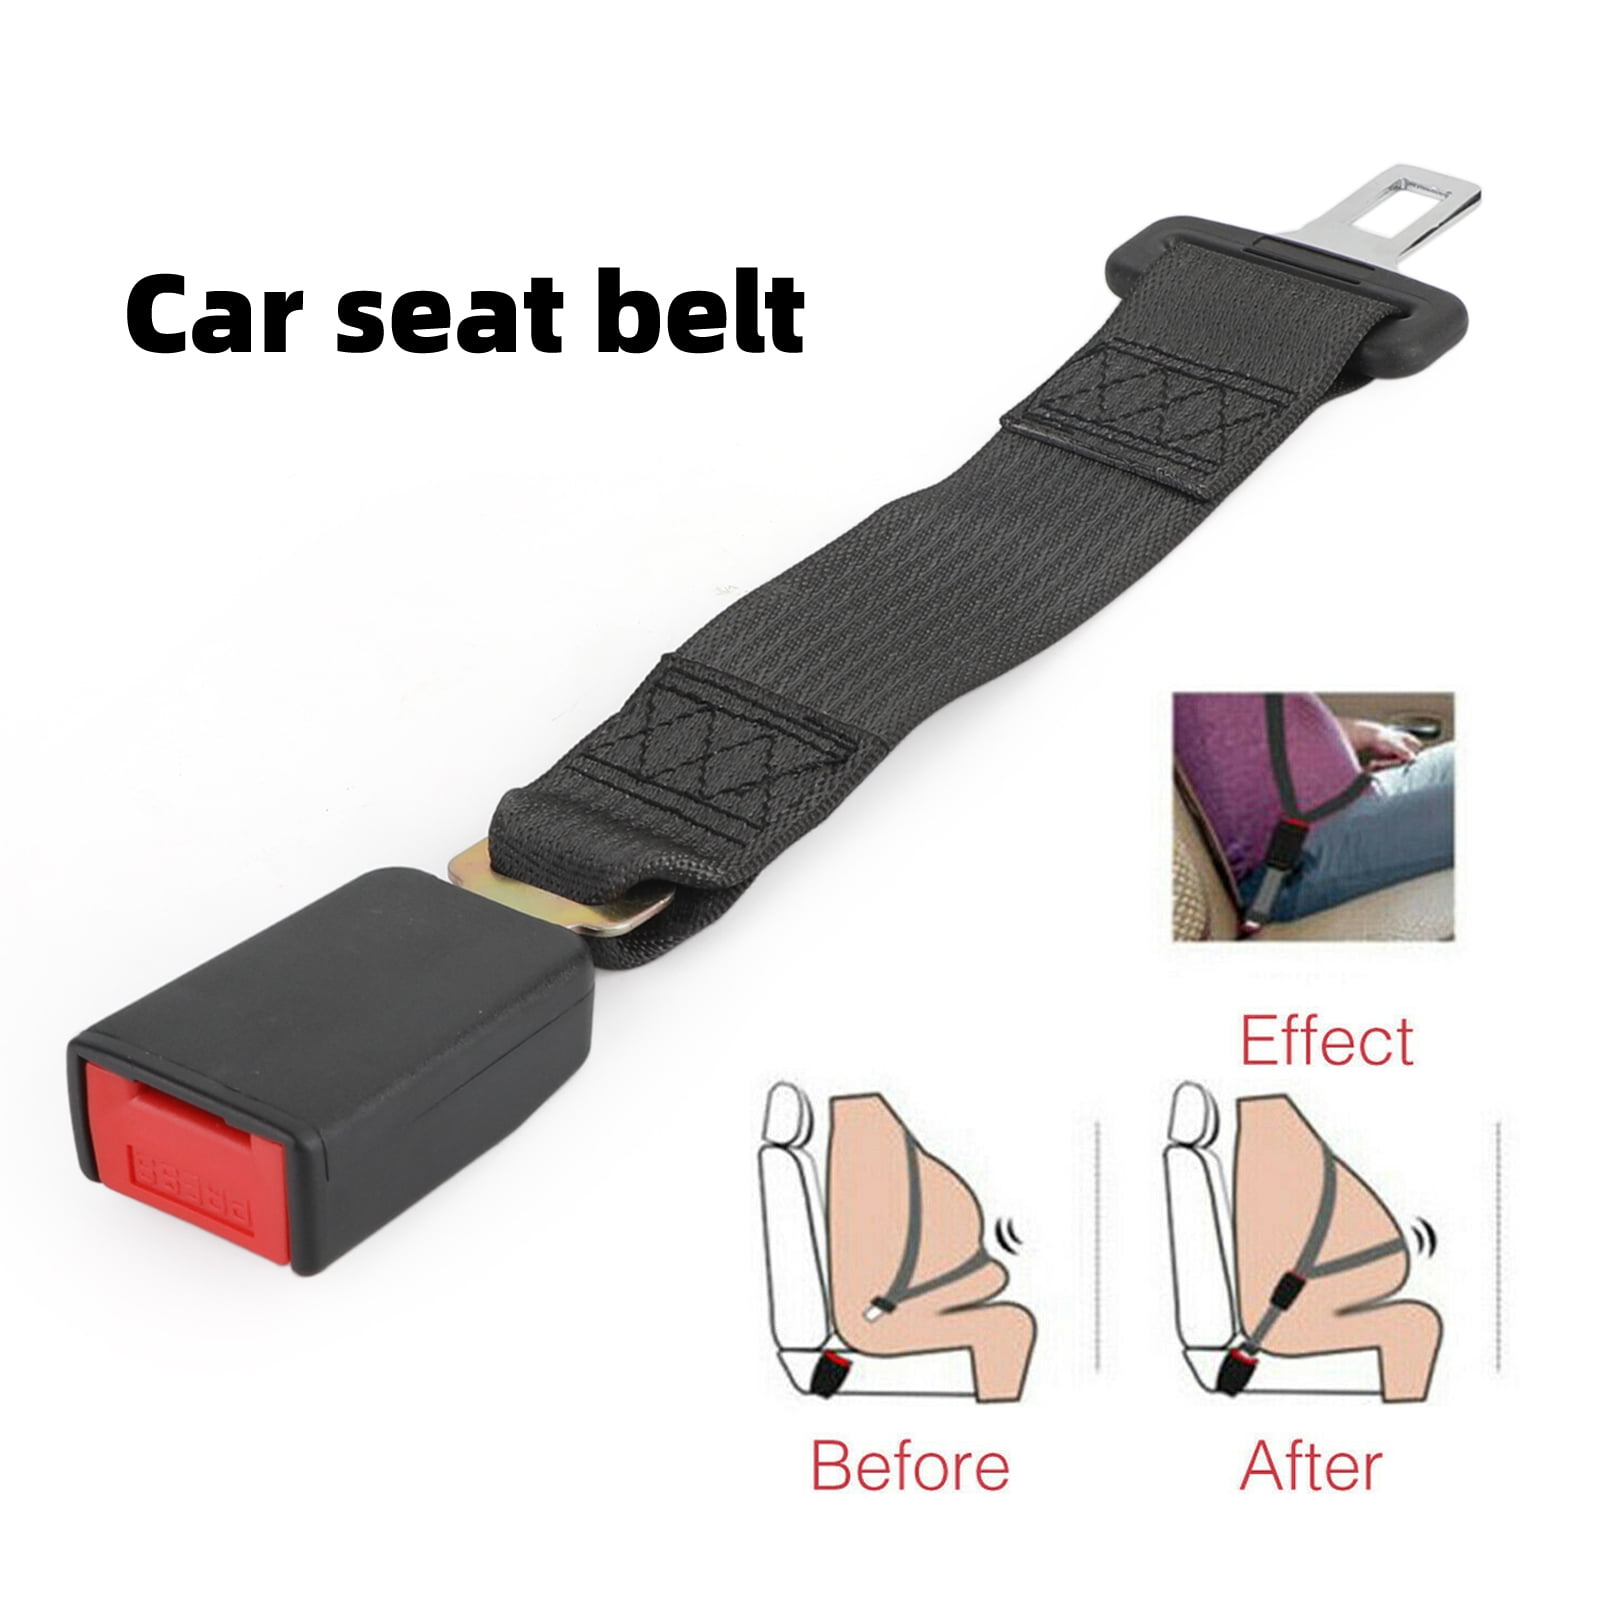 Volvo C70 Seat Belt Extension Adds 5" Black Rigid E4 Safety Certified